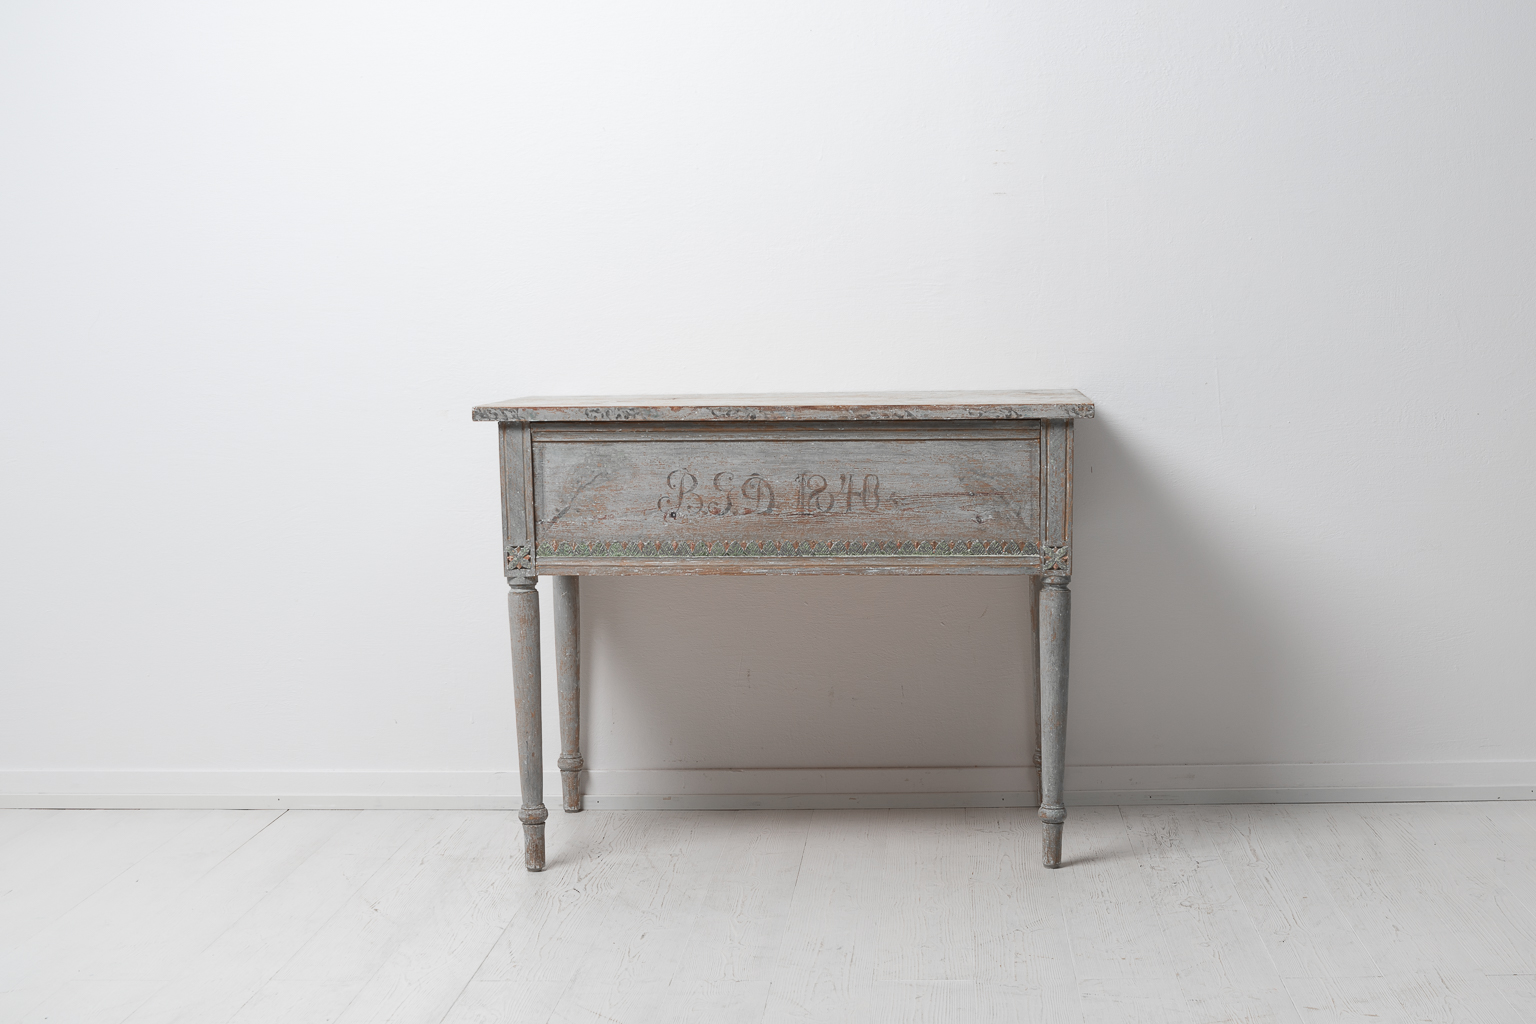 Rare genuine antique table from Northern Sweden. The table is an authentic country house furniture from Sweden and functions as a wall or side table